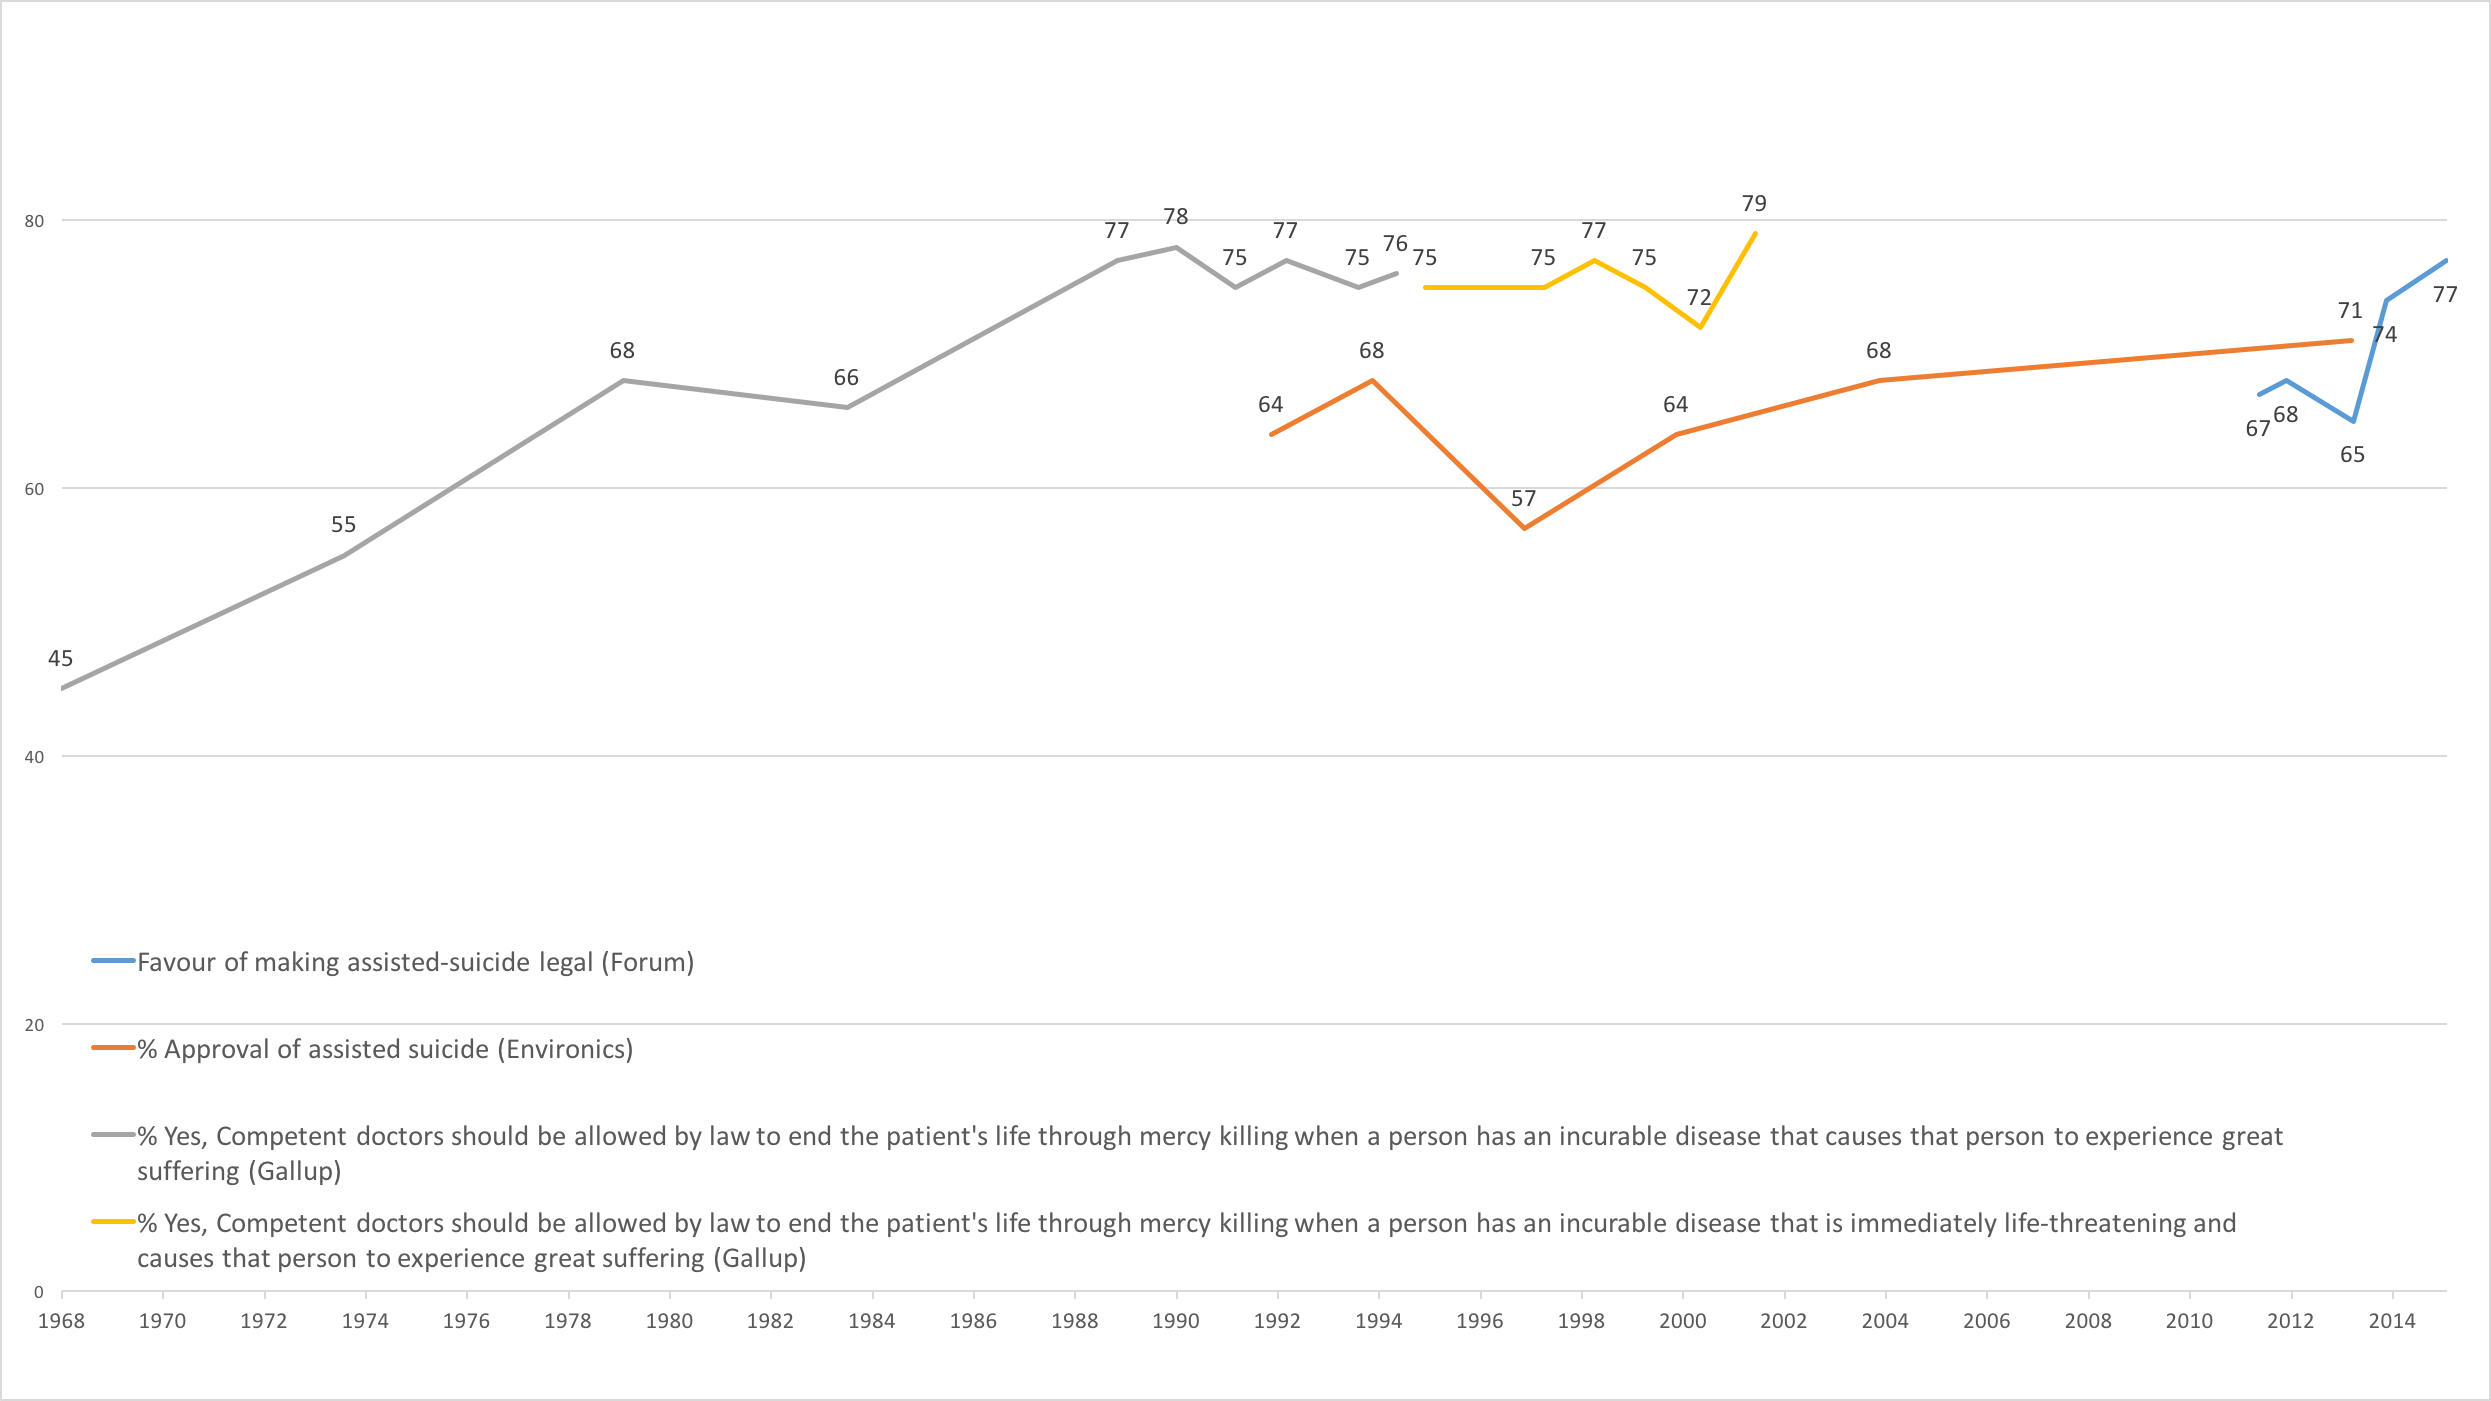 Public Support for Assisted Dying: The Limited Trend Data